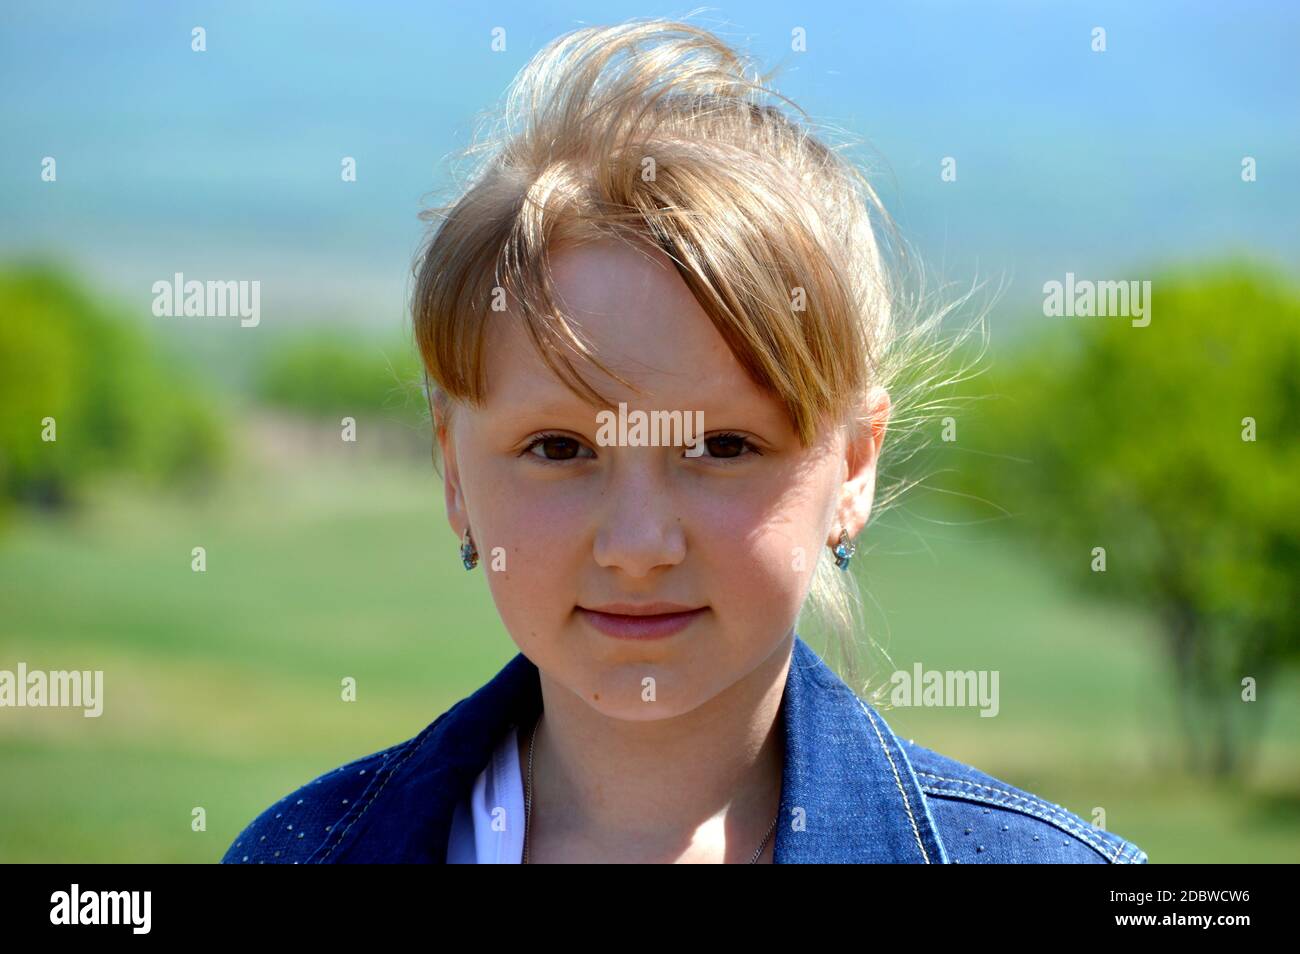 Portrait of 10 year old Russian smiling blonde girl on a background of green field. cute face, looking at the camera Stock Photo